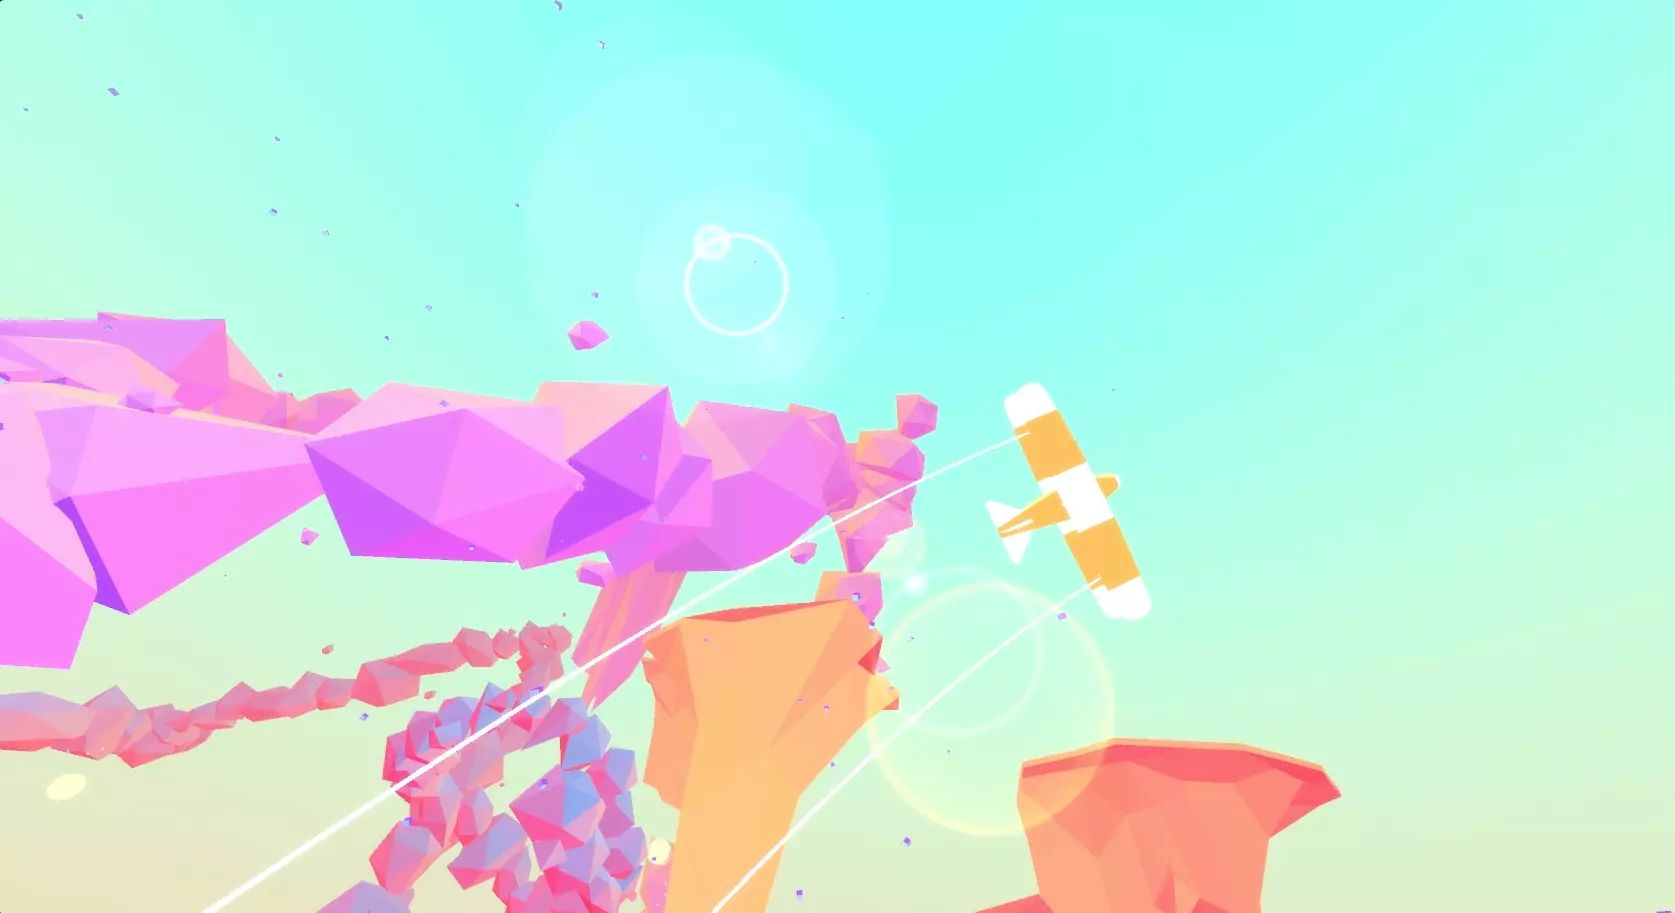 Poly Flight - Android game screenshots.